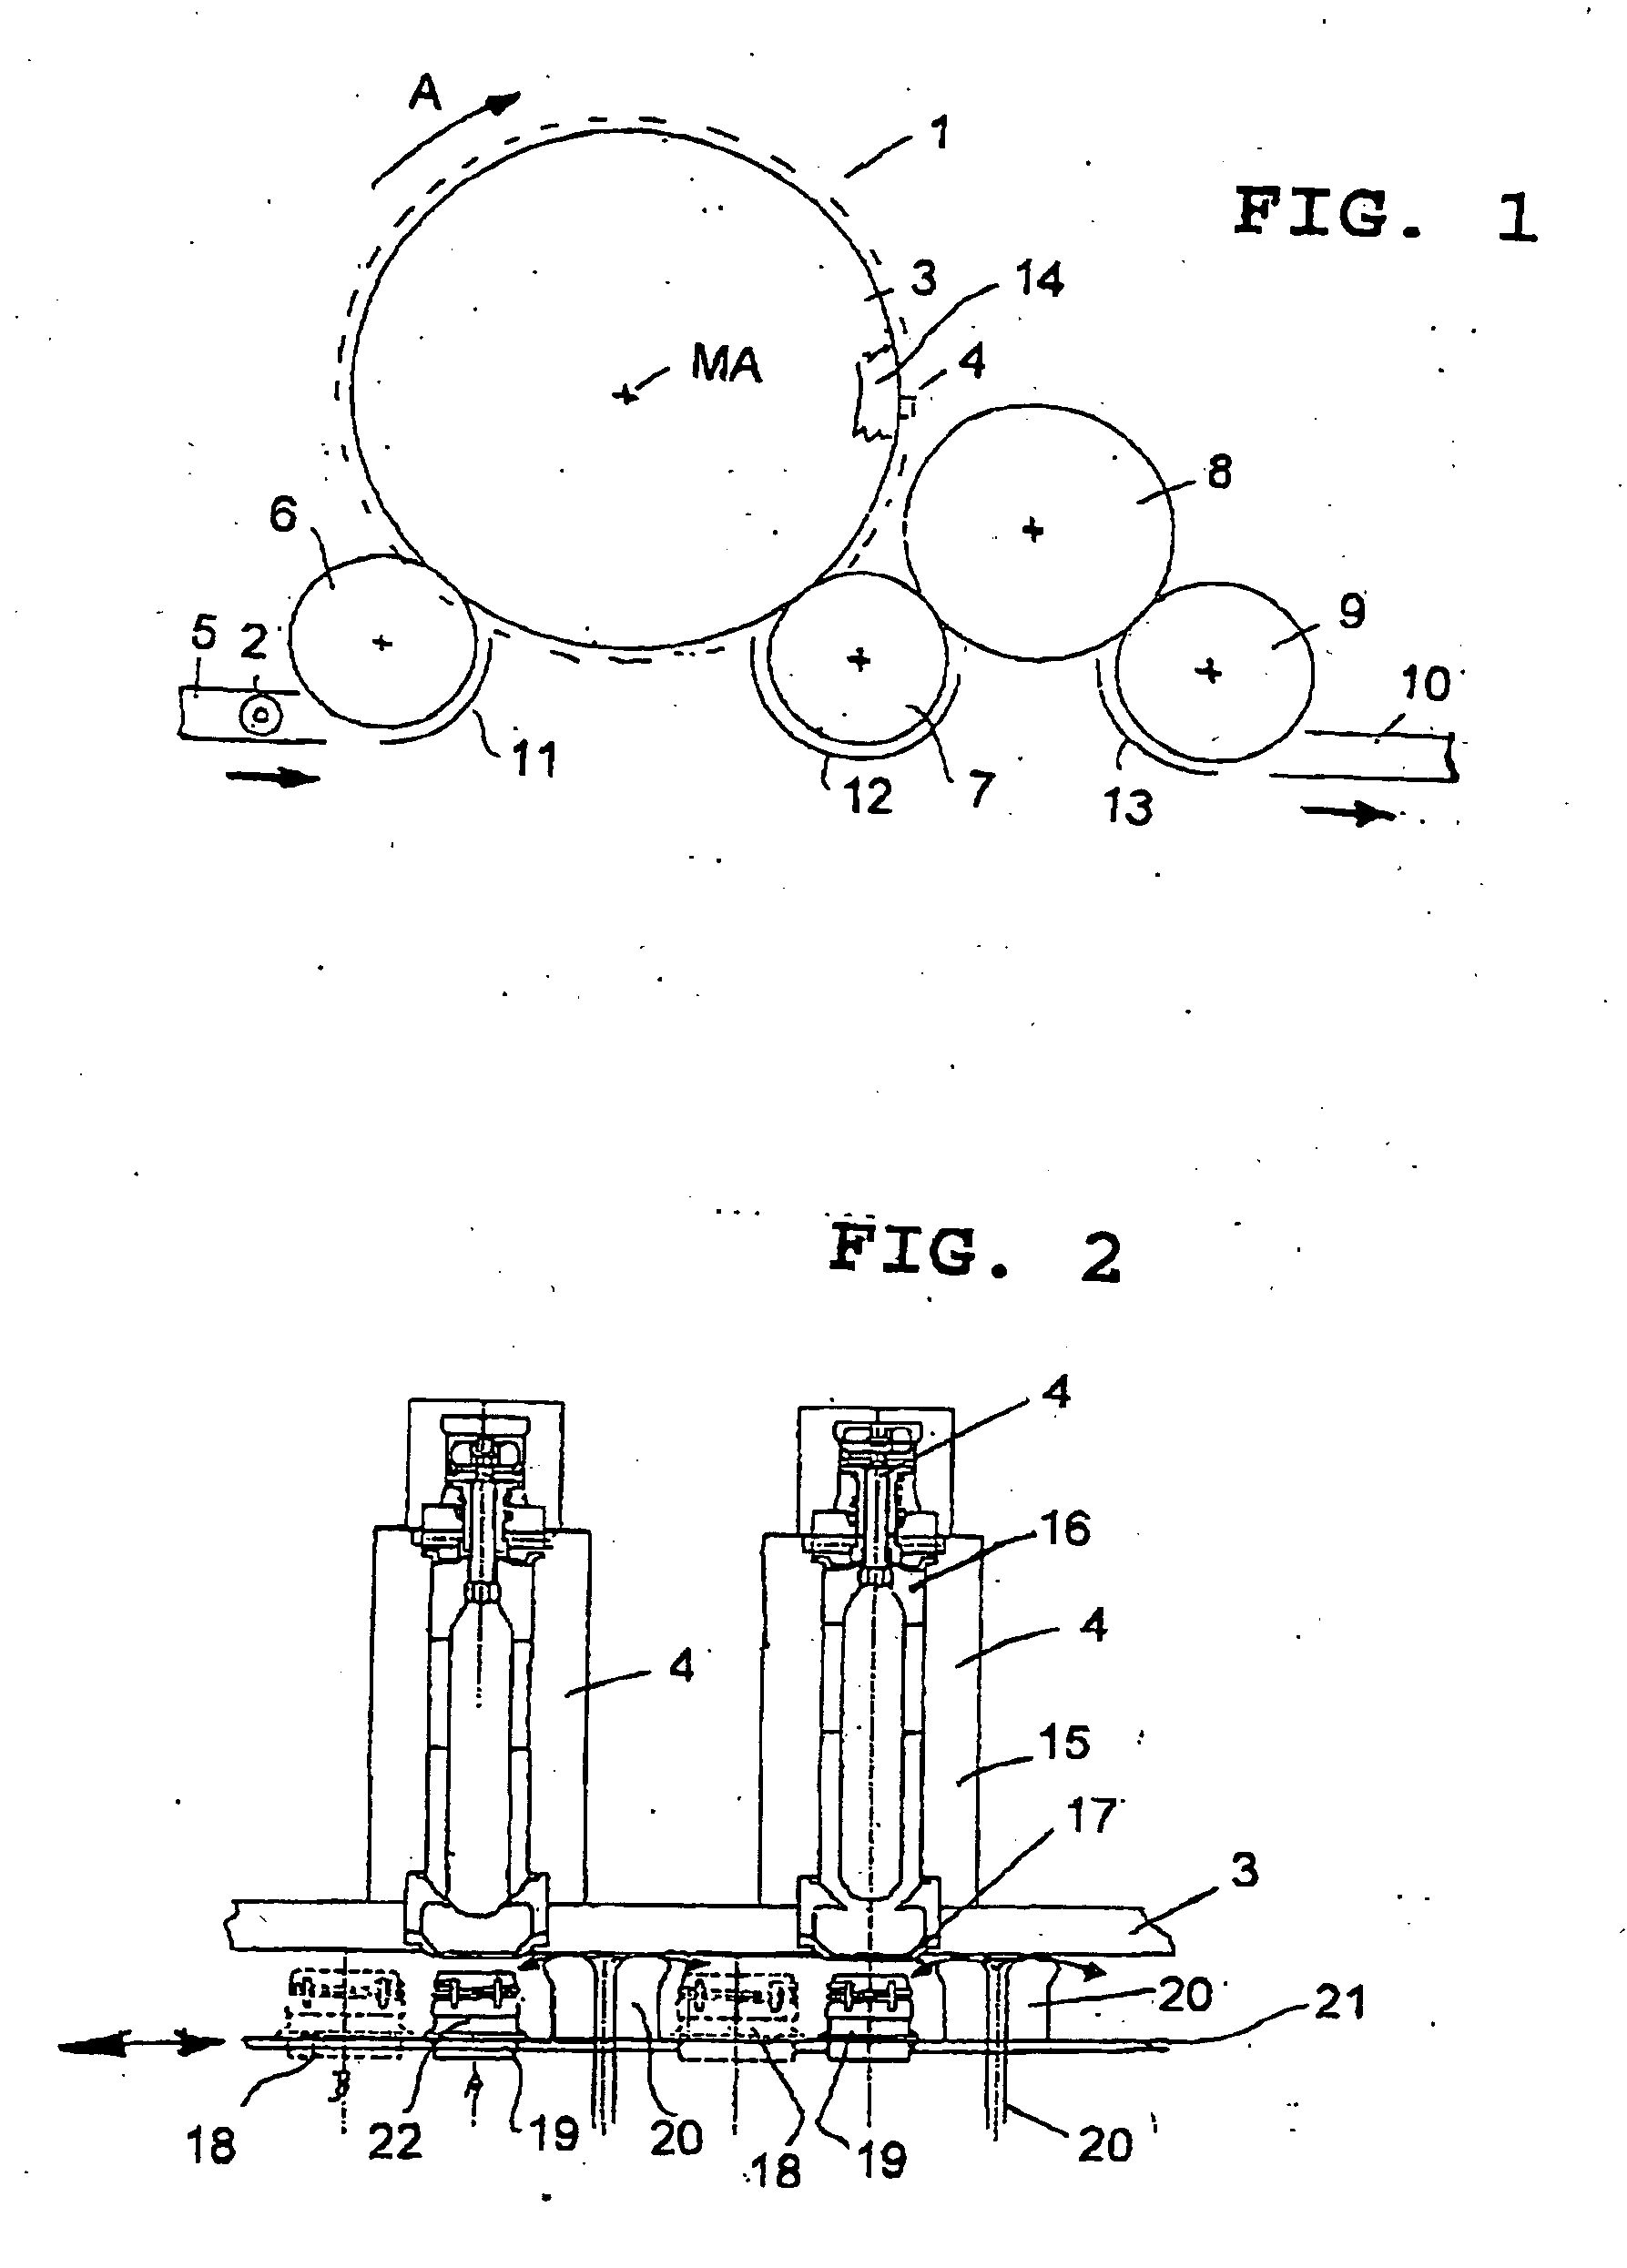 Beverage bottling plant for filling bottles with a liquid beverage filling material, having an apparatus for exchanging operating units disposed at rotating container handling machines